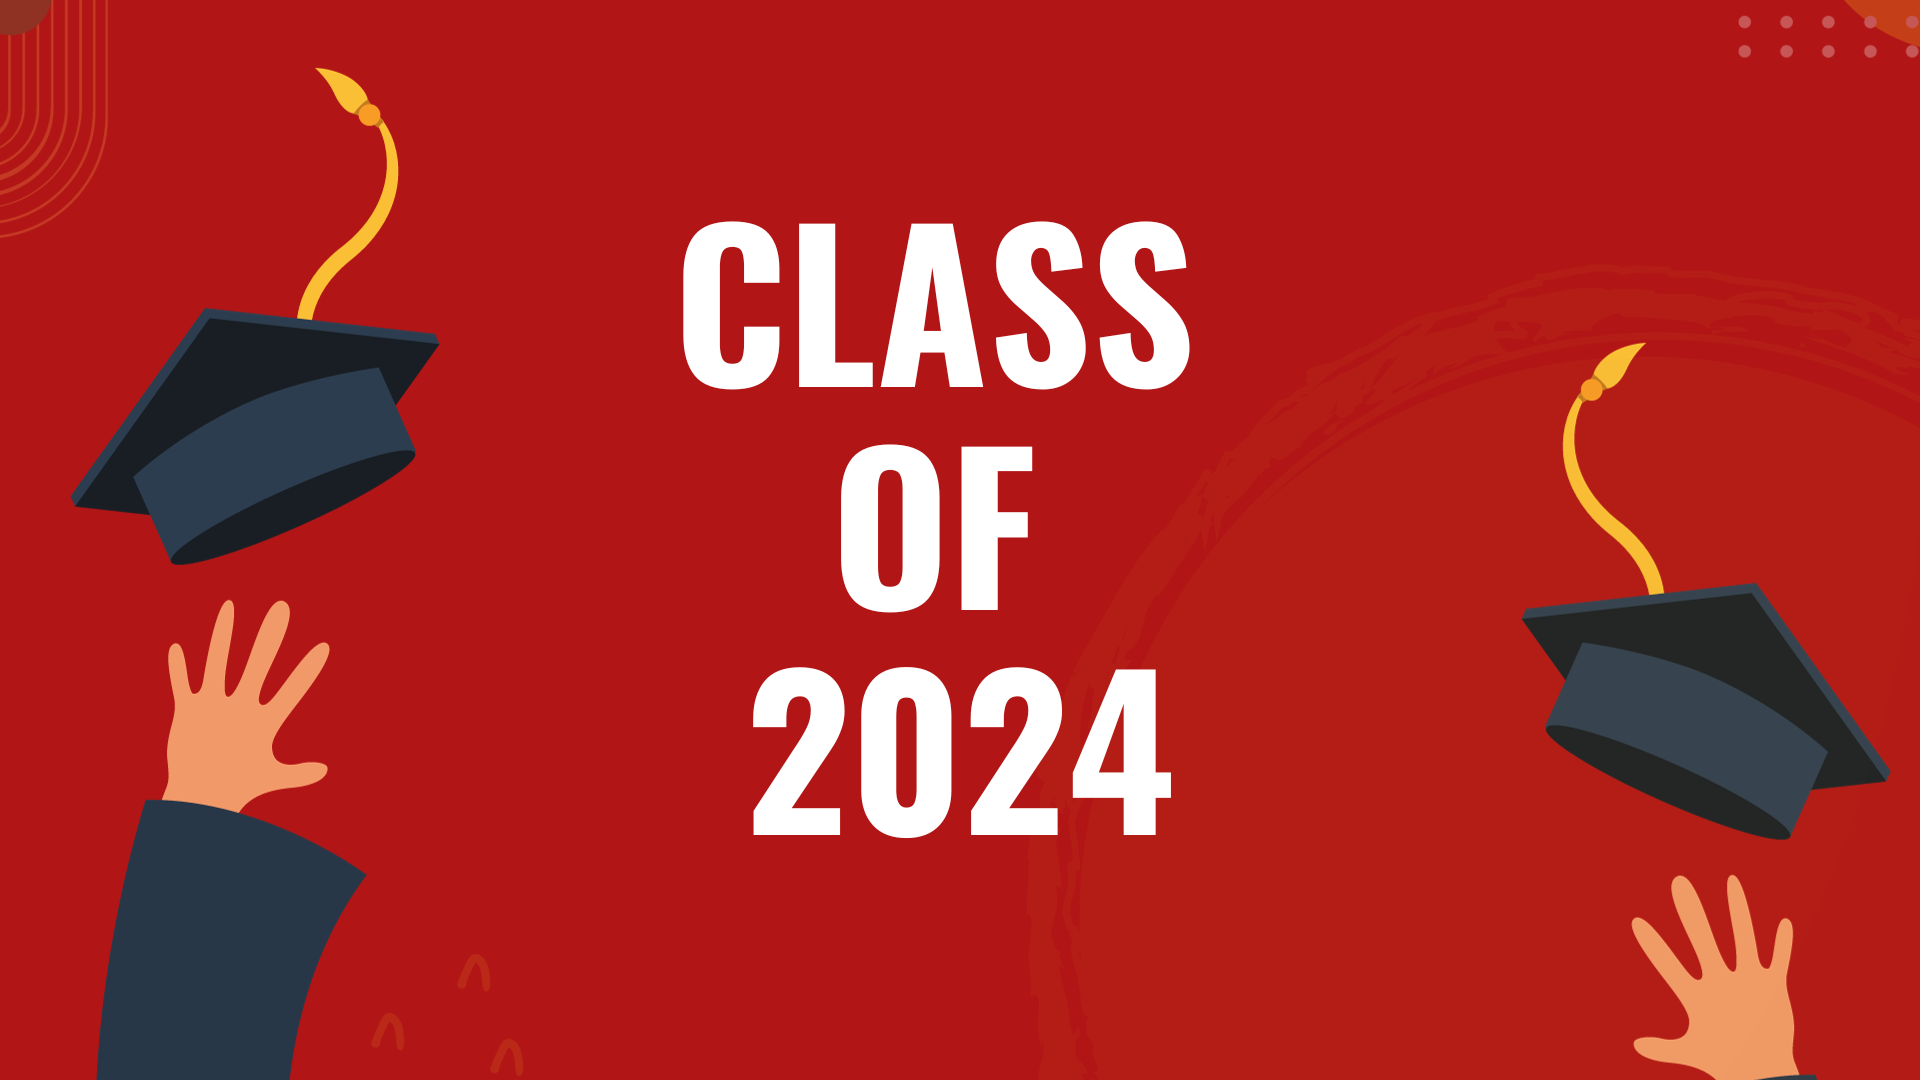 image features two graduation caps and the words class of 2024